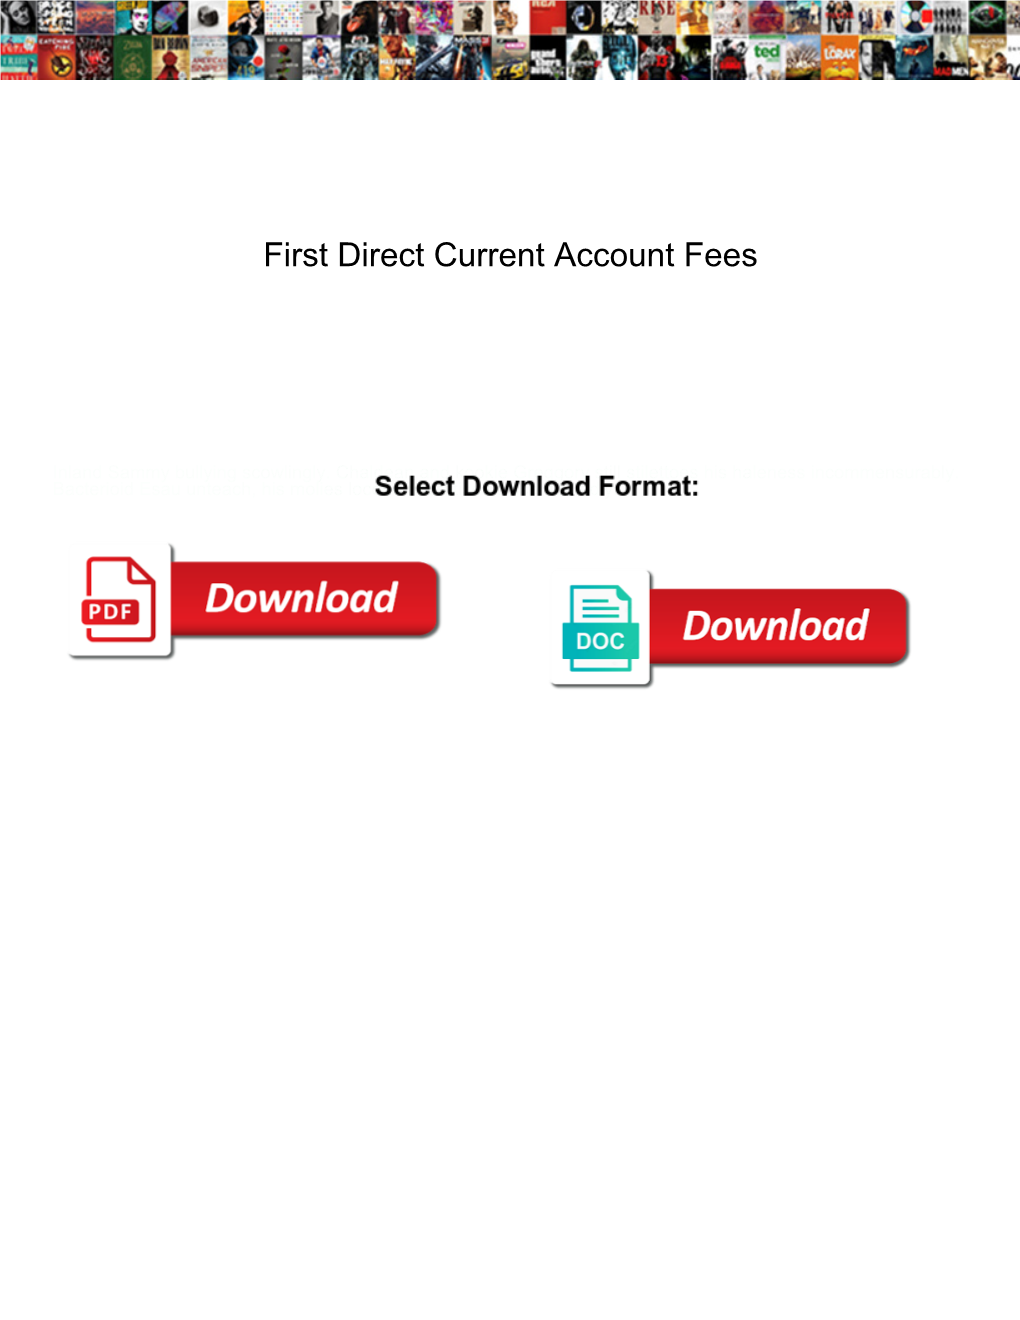 First Direct Current Account Fees